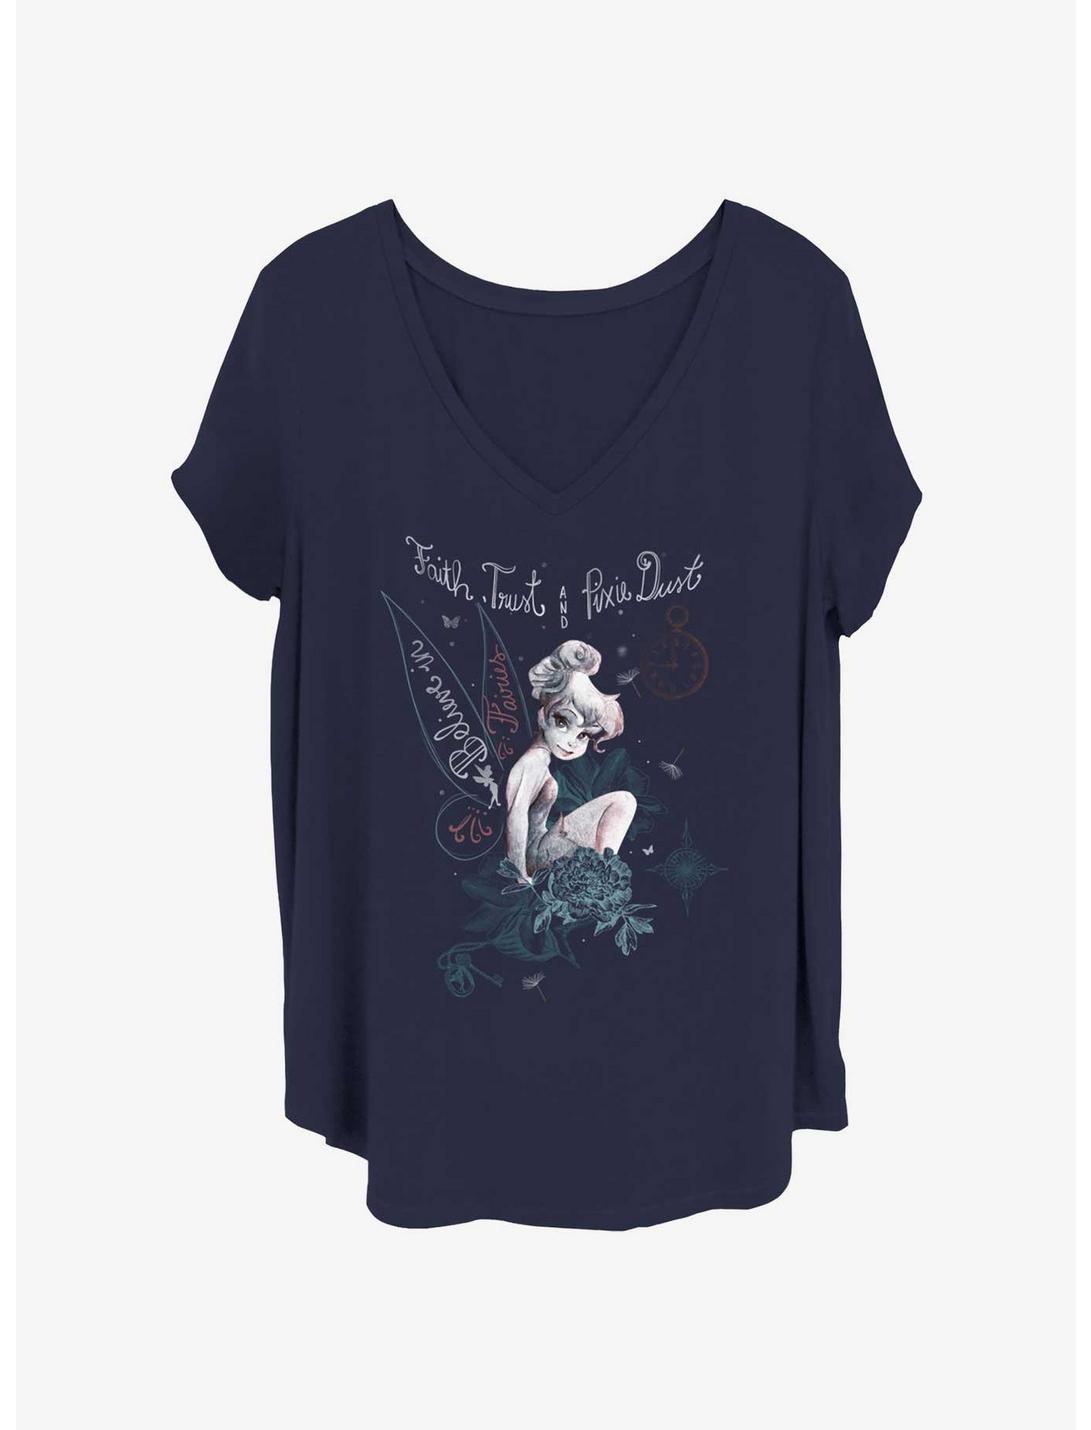 Disney Tinker Bell In Fairy Land Womens T-Shirt Plus Size, NAVY, hi-res